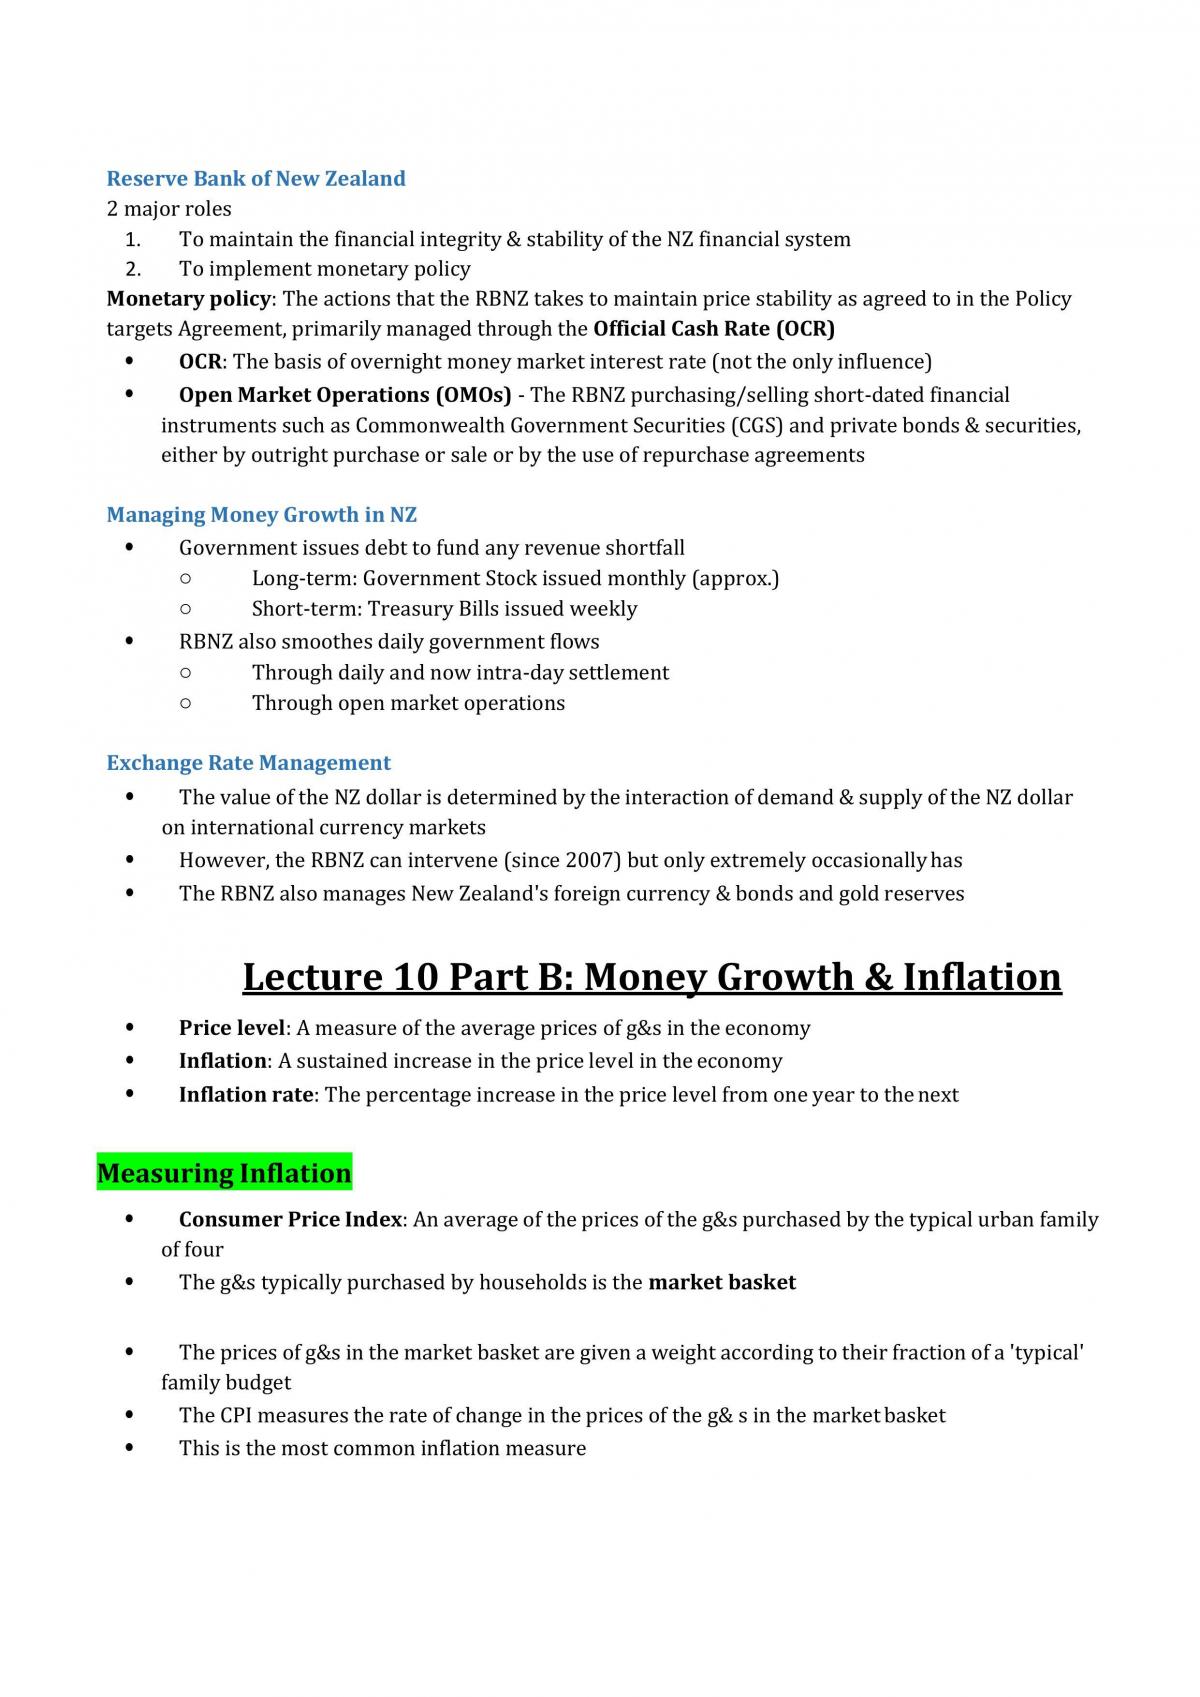 Business Economics Full Modules Notes - Page 52